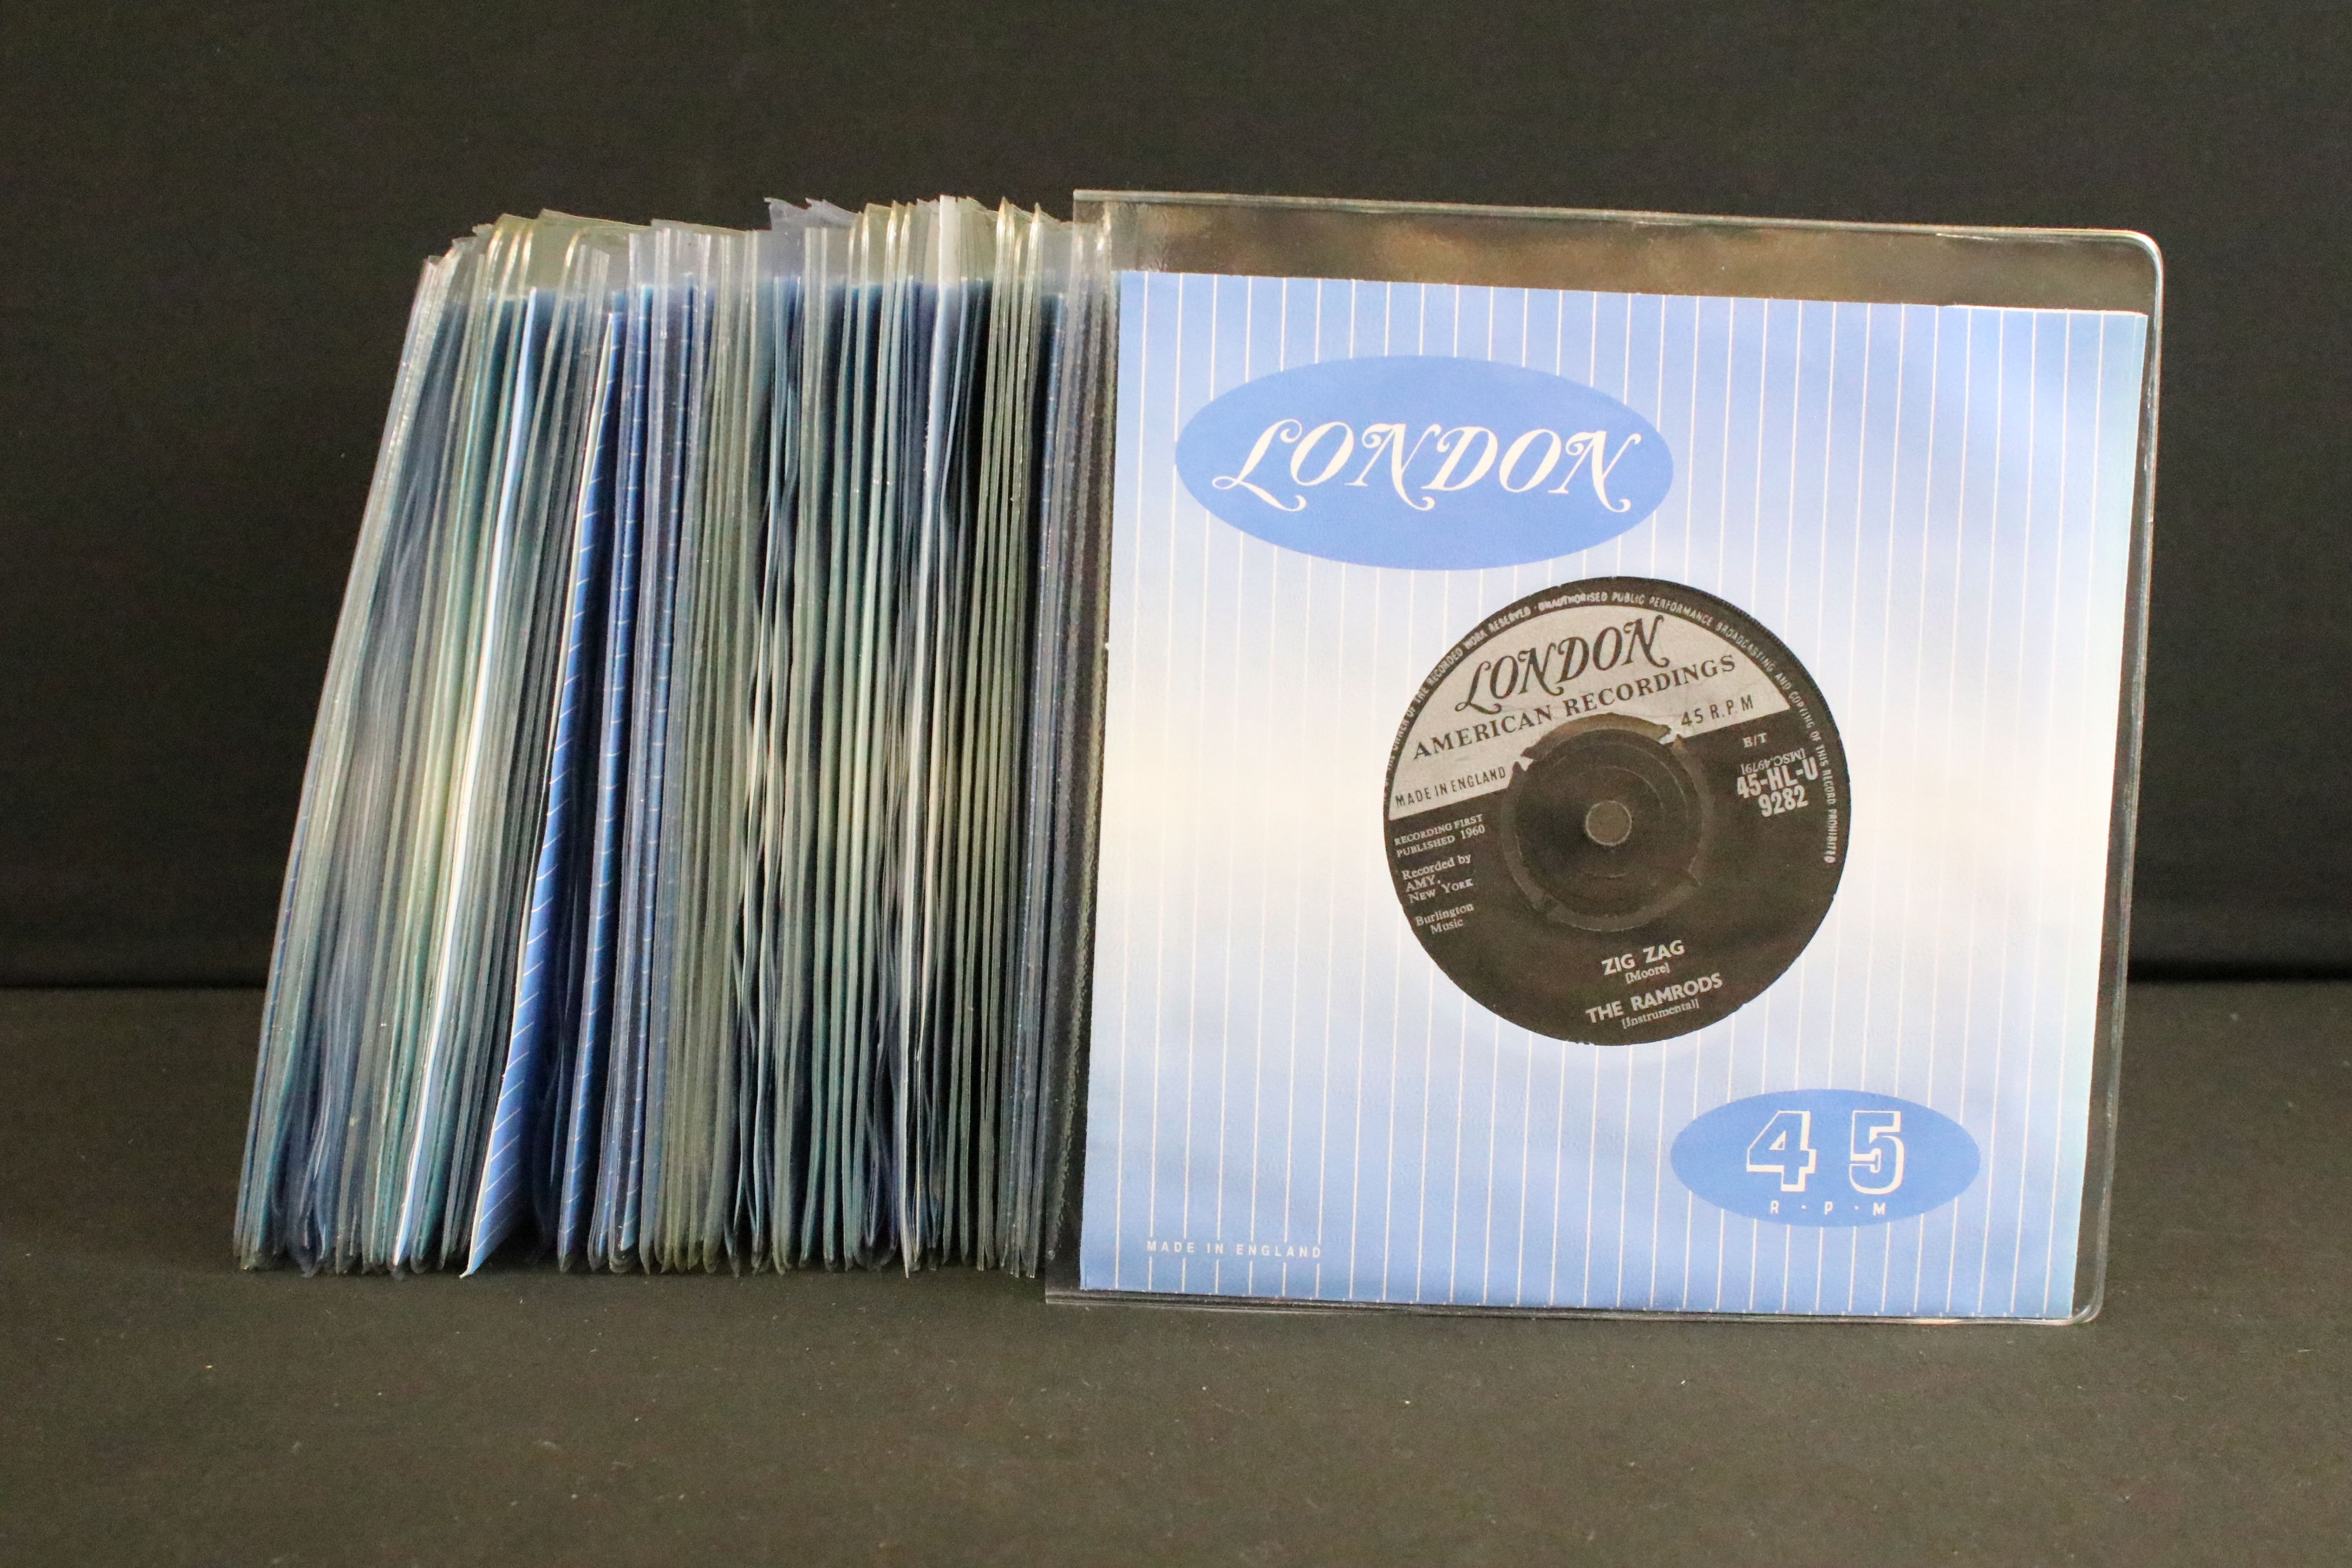 Vinyl - 56 mainly Rock N Roll 7" singles on London Records including many Tri-Centre issues to